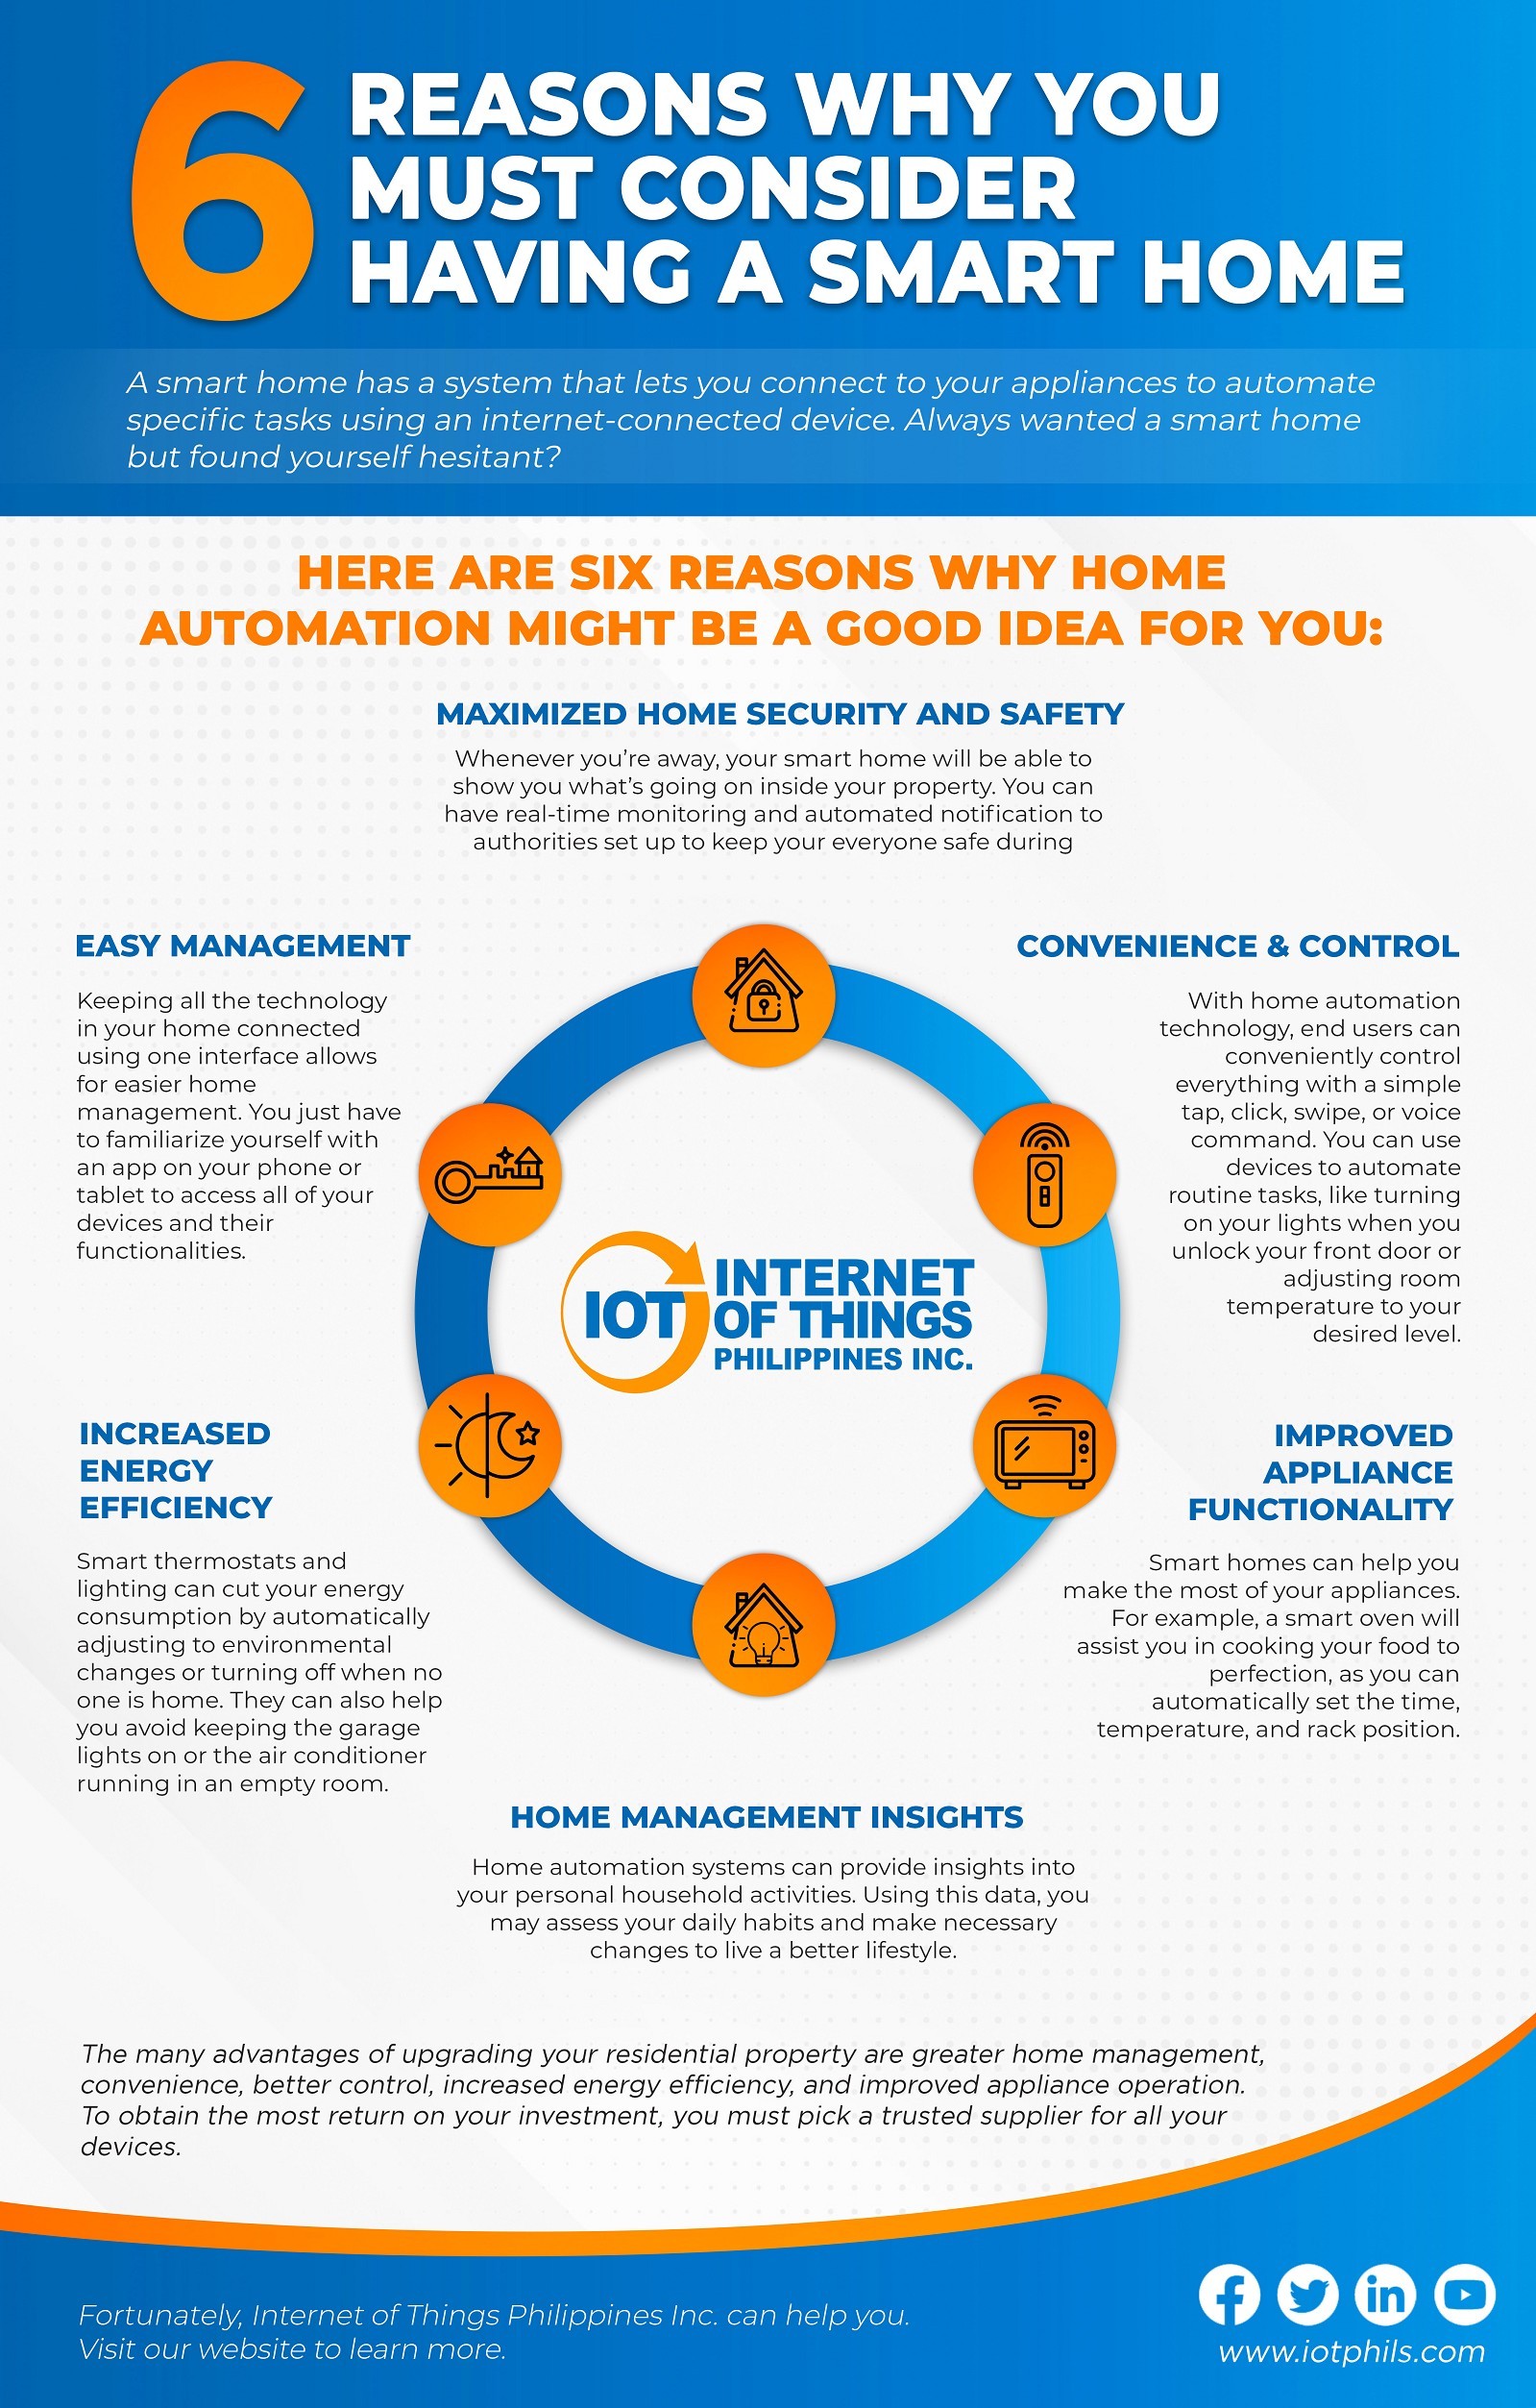 6 Reasons Why You Must Consider Having a Smart Home